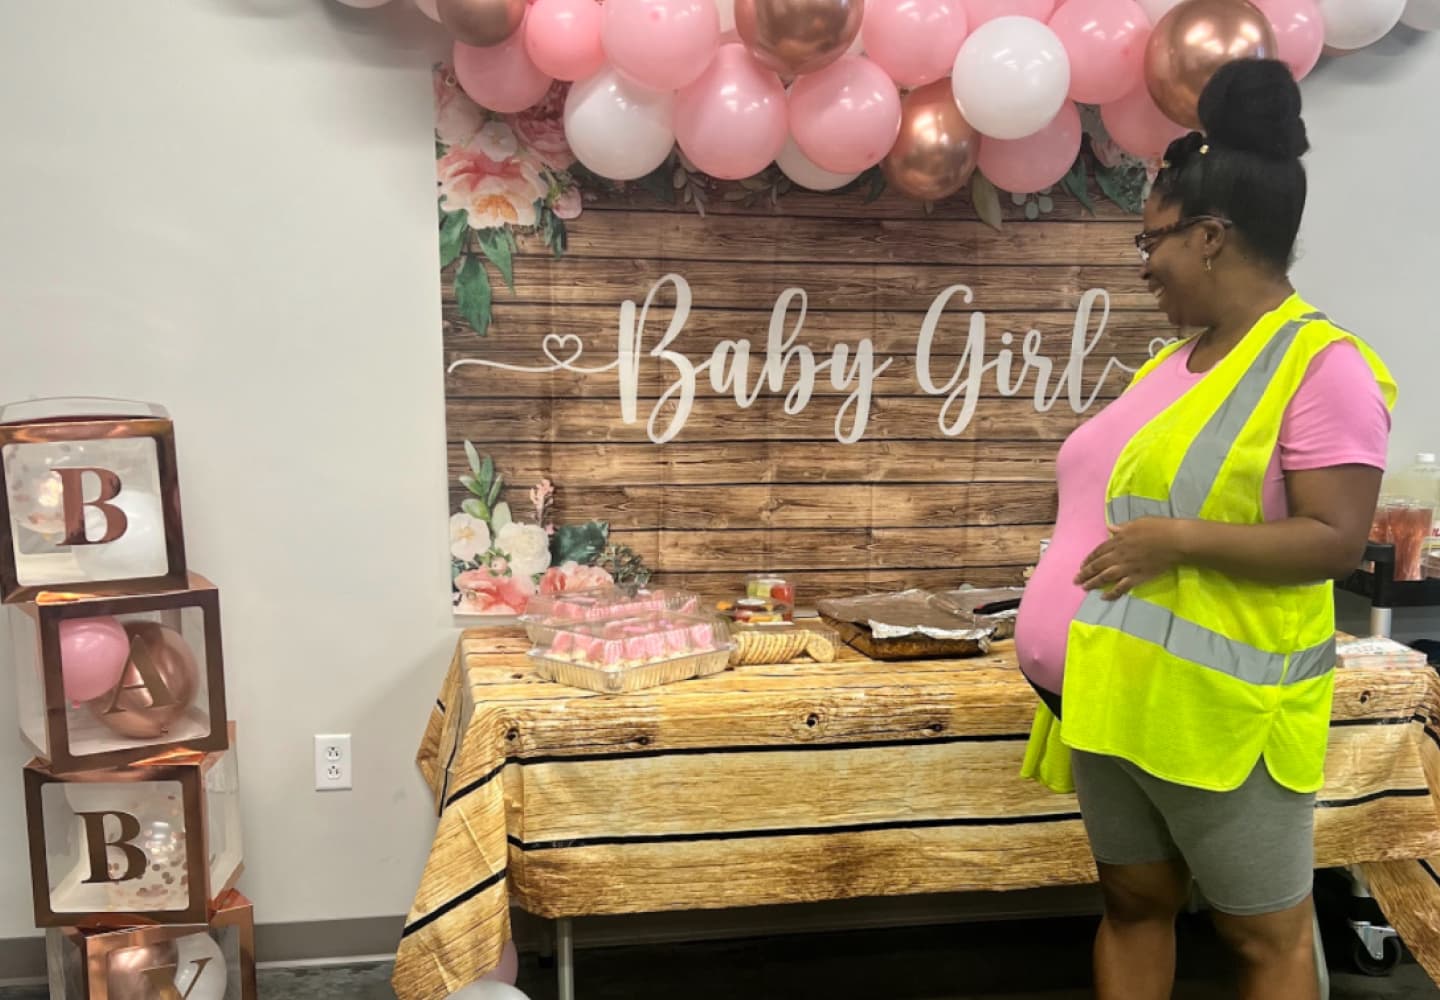 Employee baby shower at one of our distribution centers